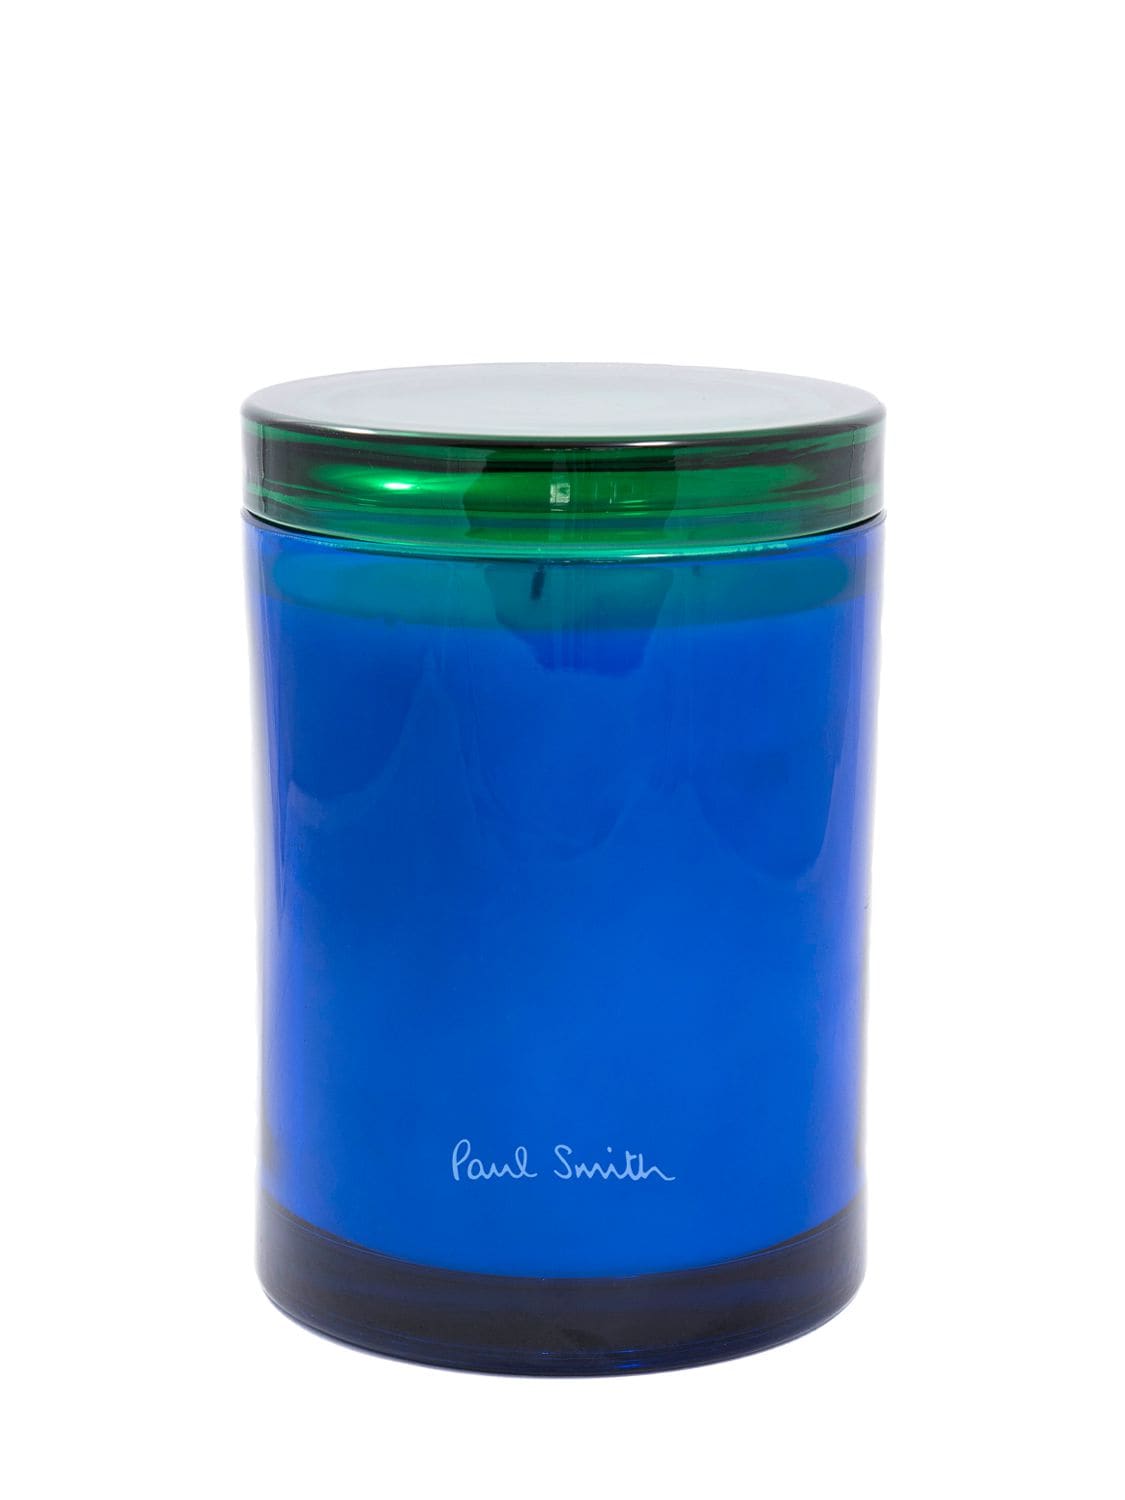 Paul Smith 35 Oz. Early Bird Candle In Blue